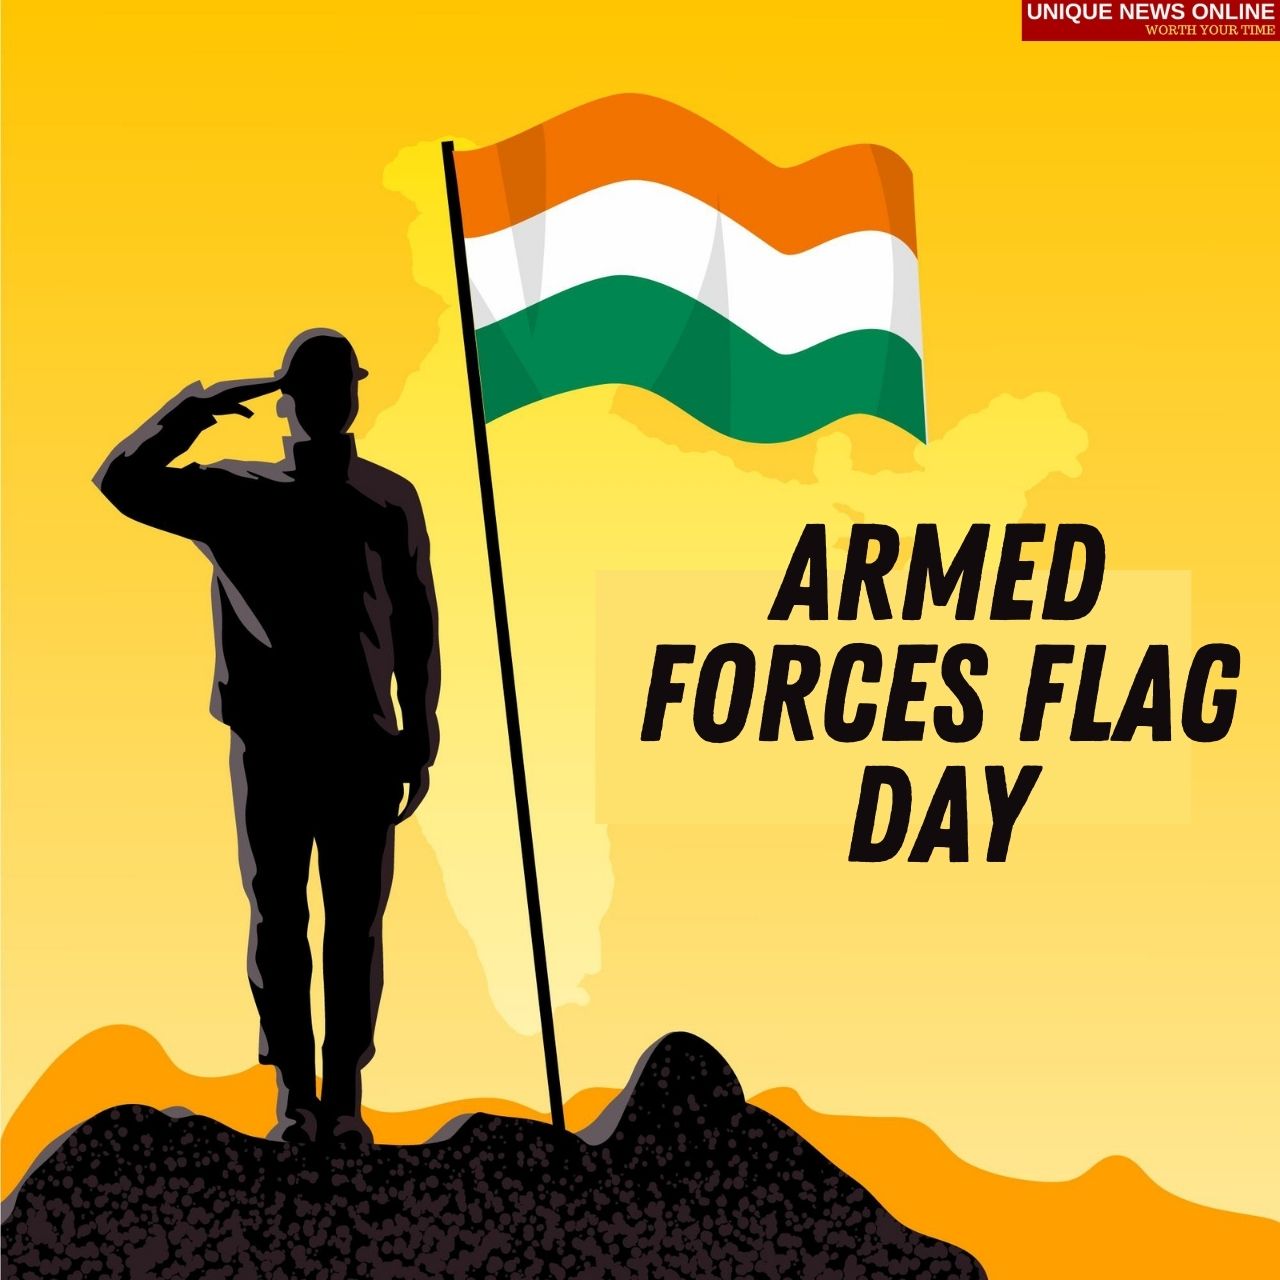 Happy Armed Forces Flag Day 2021 Quotes, Wishes, HD Images, Messages, and greetings to Share